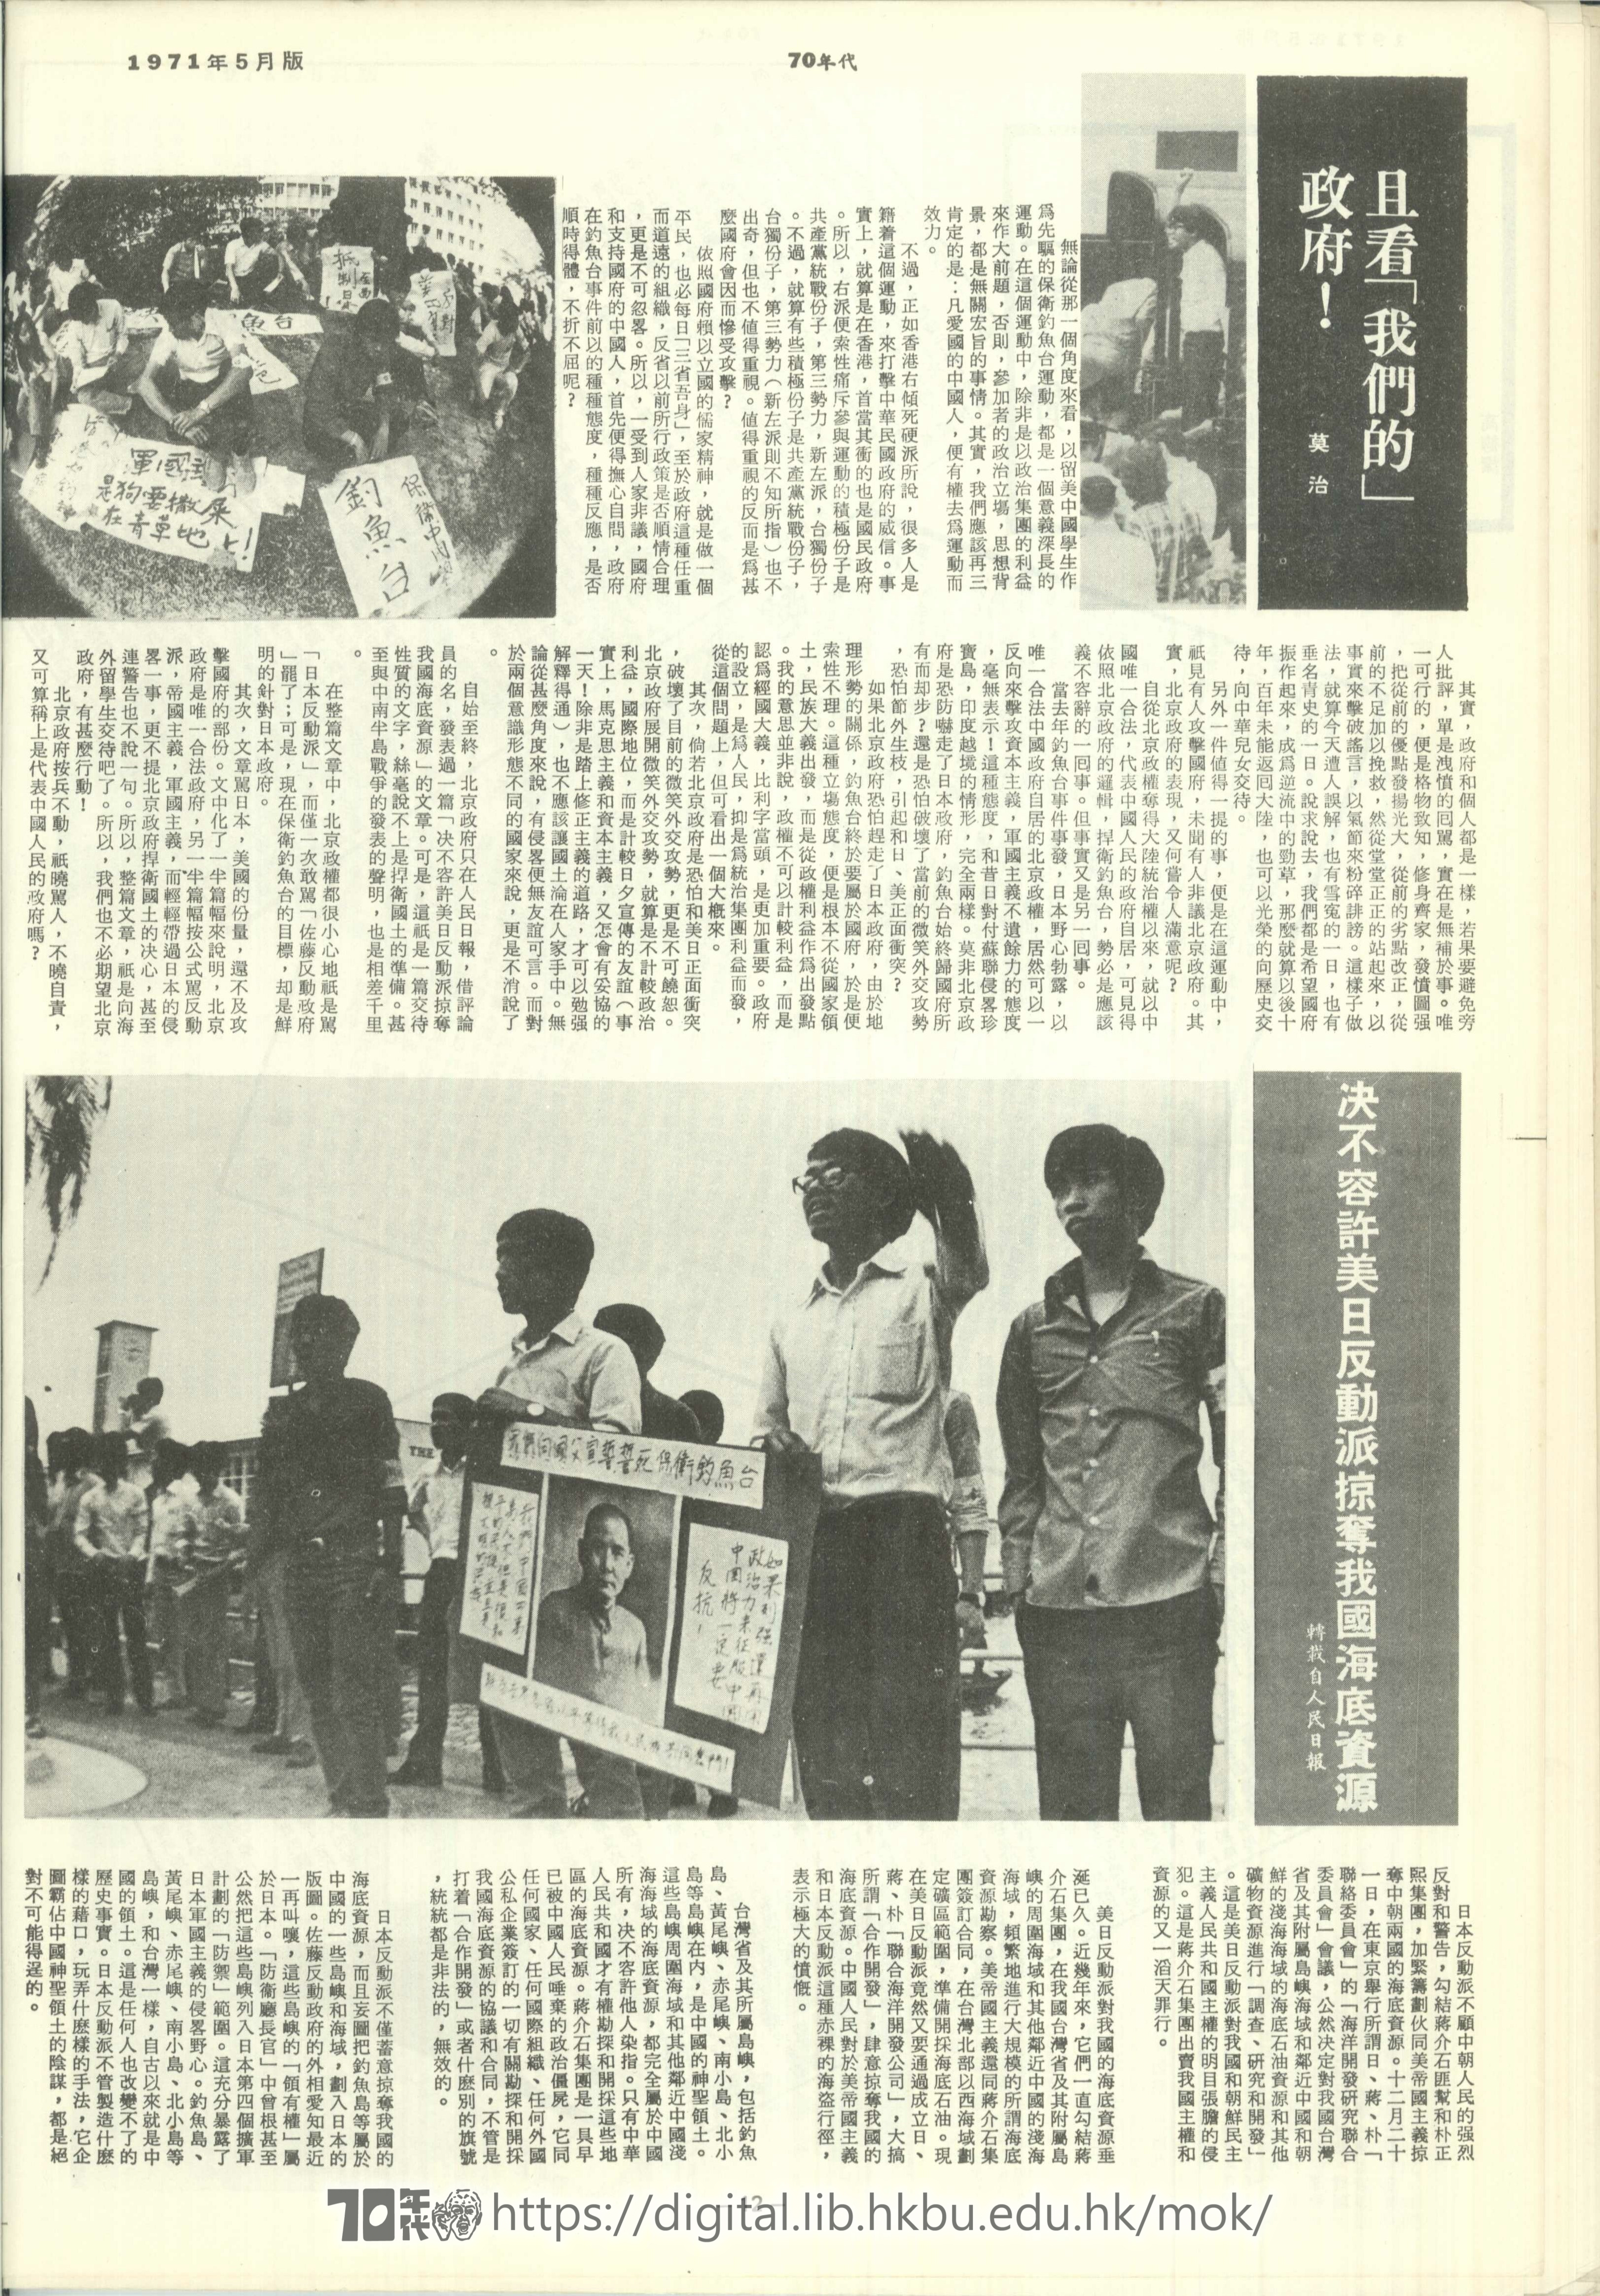  20 American and Japanese anti-revolutionary fractions 轉載自人民日報 